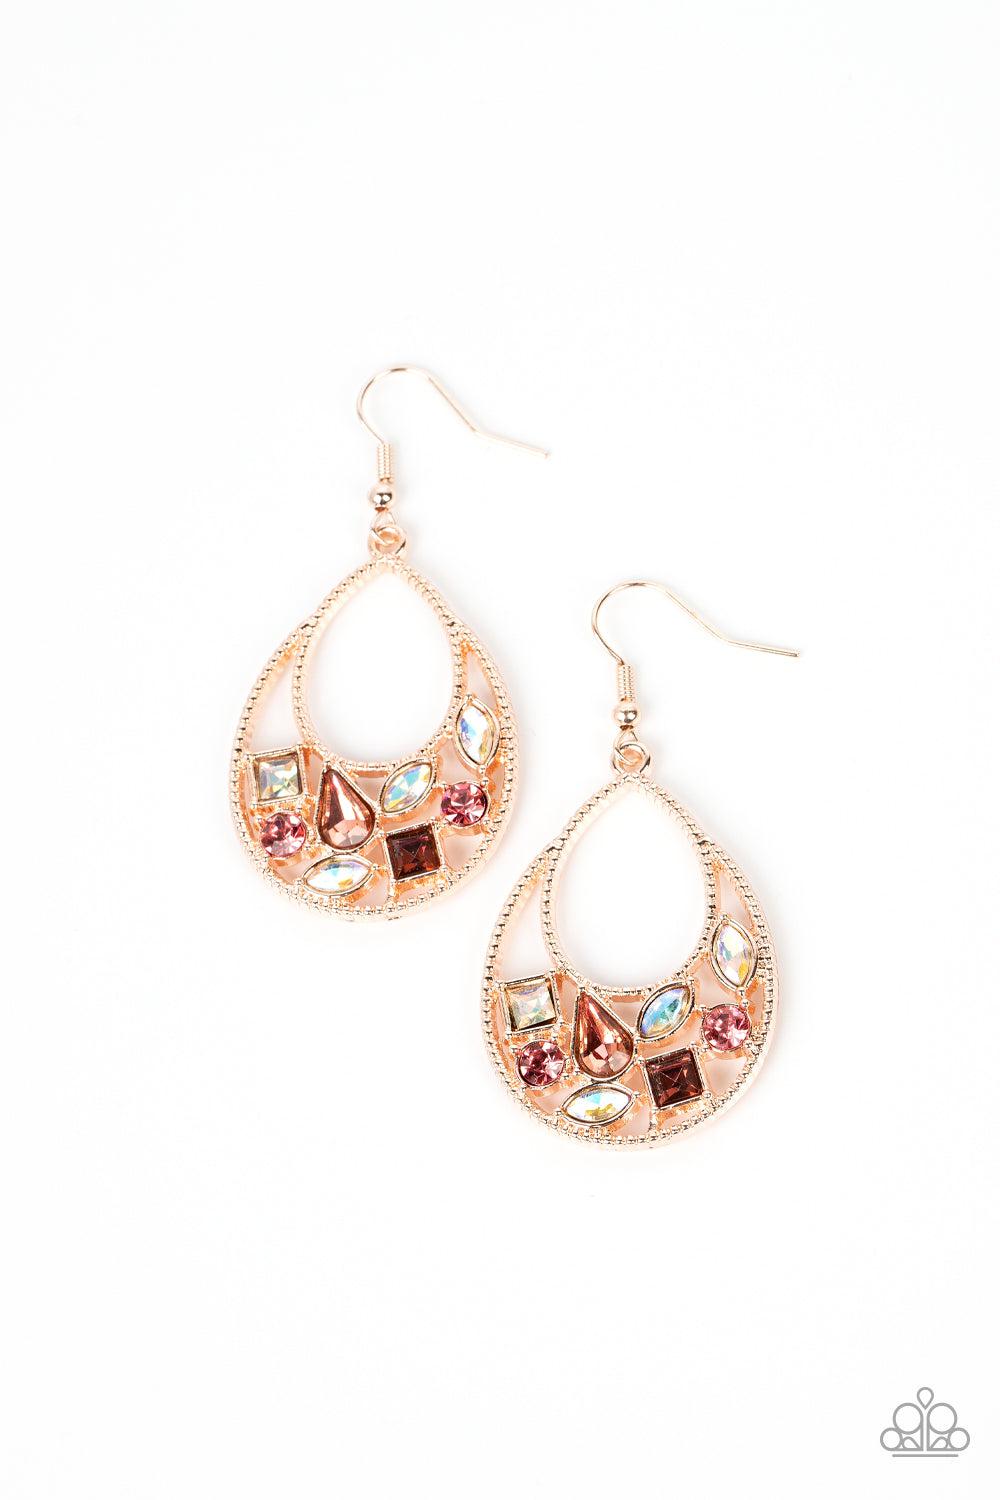 Regal Recreation Gold and Iridescent Rhinestone Earrings - Paparazzi Accessories- lightbox - CarasShop.com - $5 Jewelry by Cara Jewels